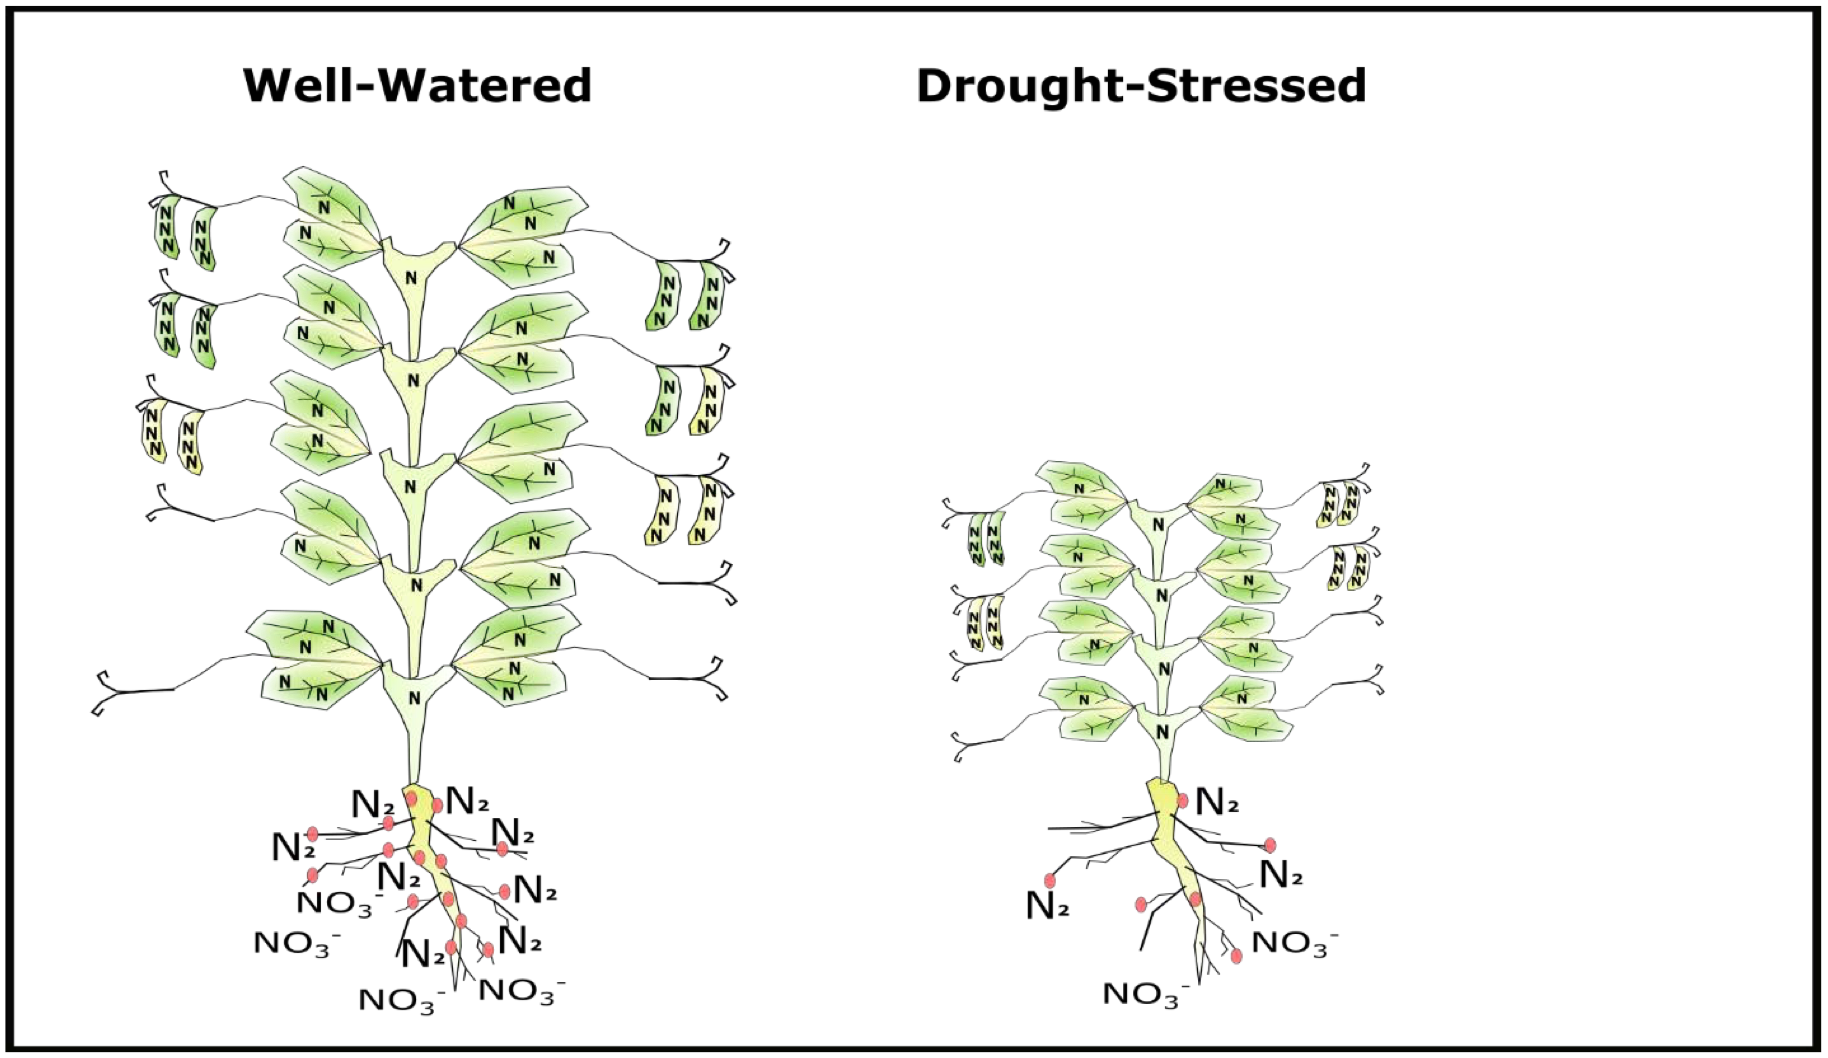 Compared to a well-watered plant, drought stress reduces the amount of soil nitrate (NO3-) absorbed by pea roots and atmospheric N (N2) fixed in pea nodules (pink circles). While drought decreases the amount of N remobilized to seeds by reducing soil N uptake and vegetative N storage capacity, reduced seed number from drought stress may increase protein on a per seed basis. Drawing by M. Bestwick.